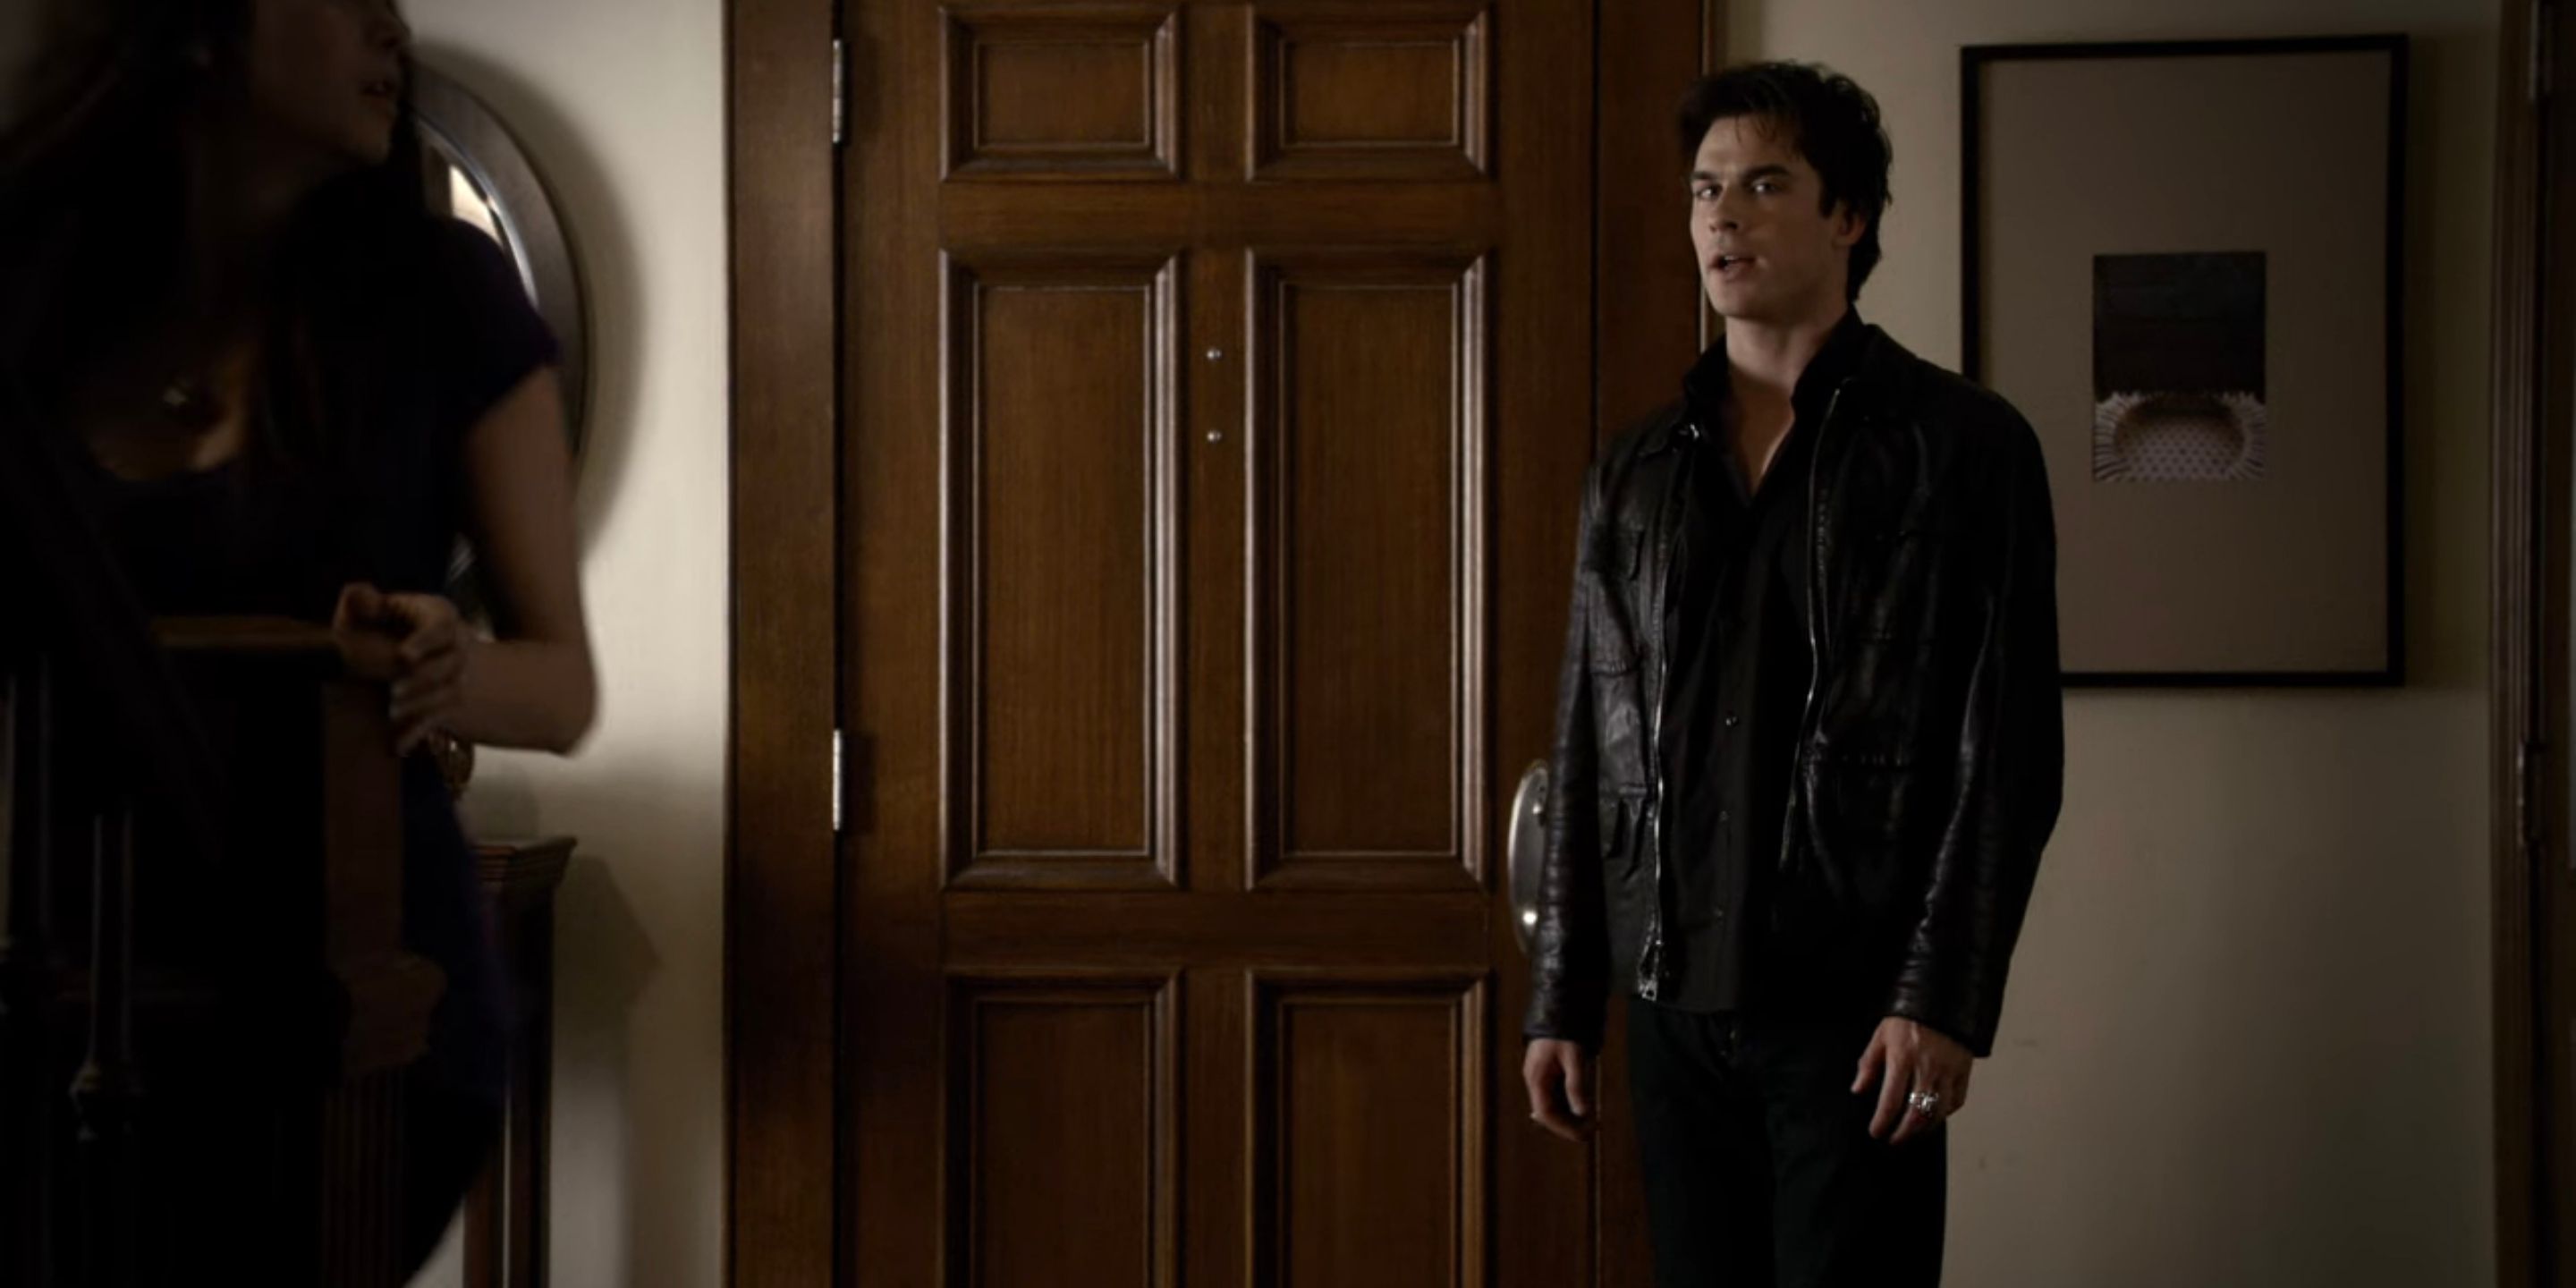 Elena tries to sneak Damon into her house in The Vampire Diaries.